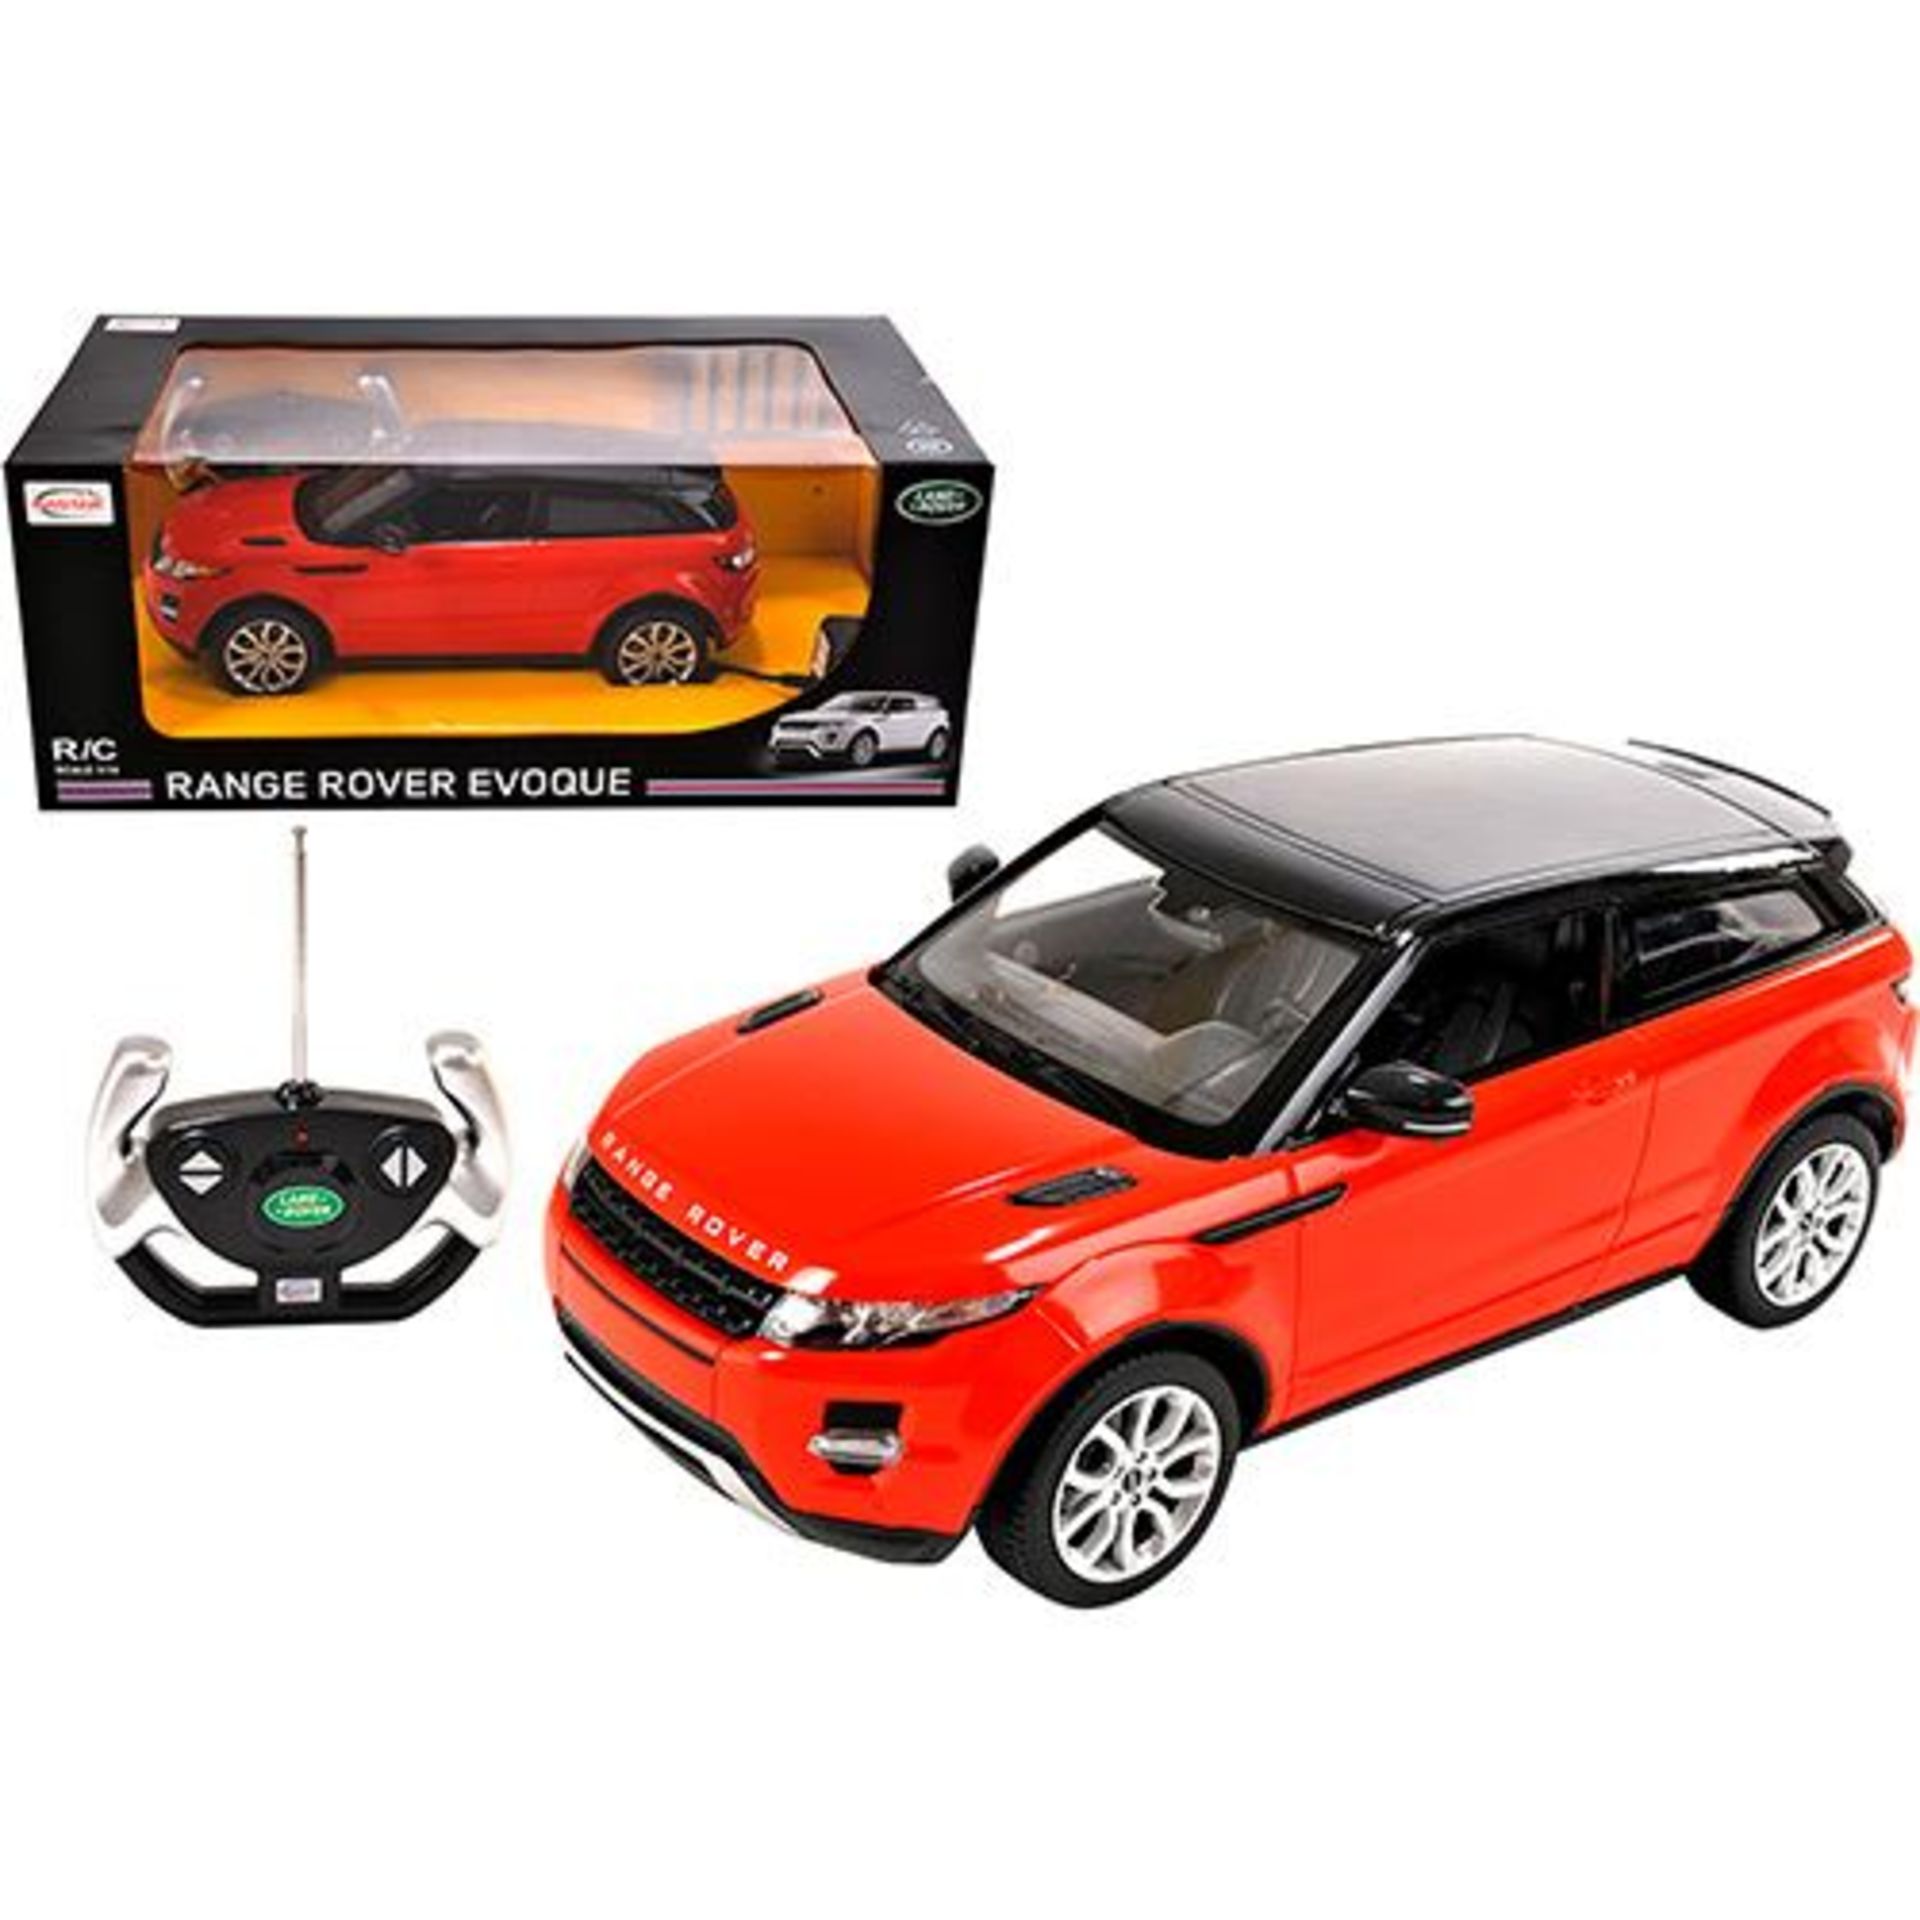 + VAT Brand New 1:14 Scale R/C Range Rover Evoque SRP49.99 Various Colours - Image 2 of 2